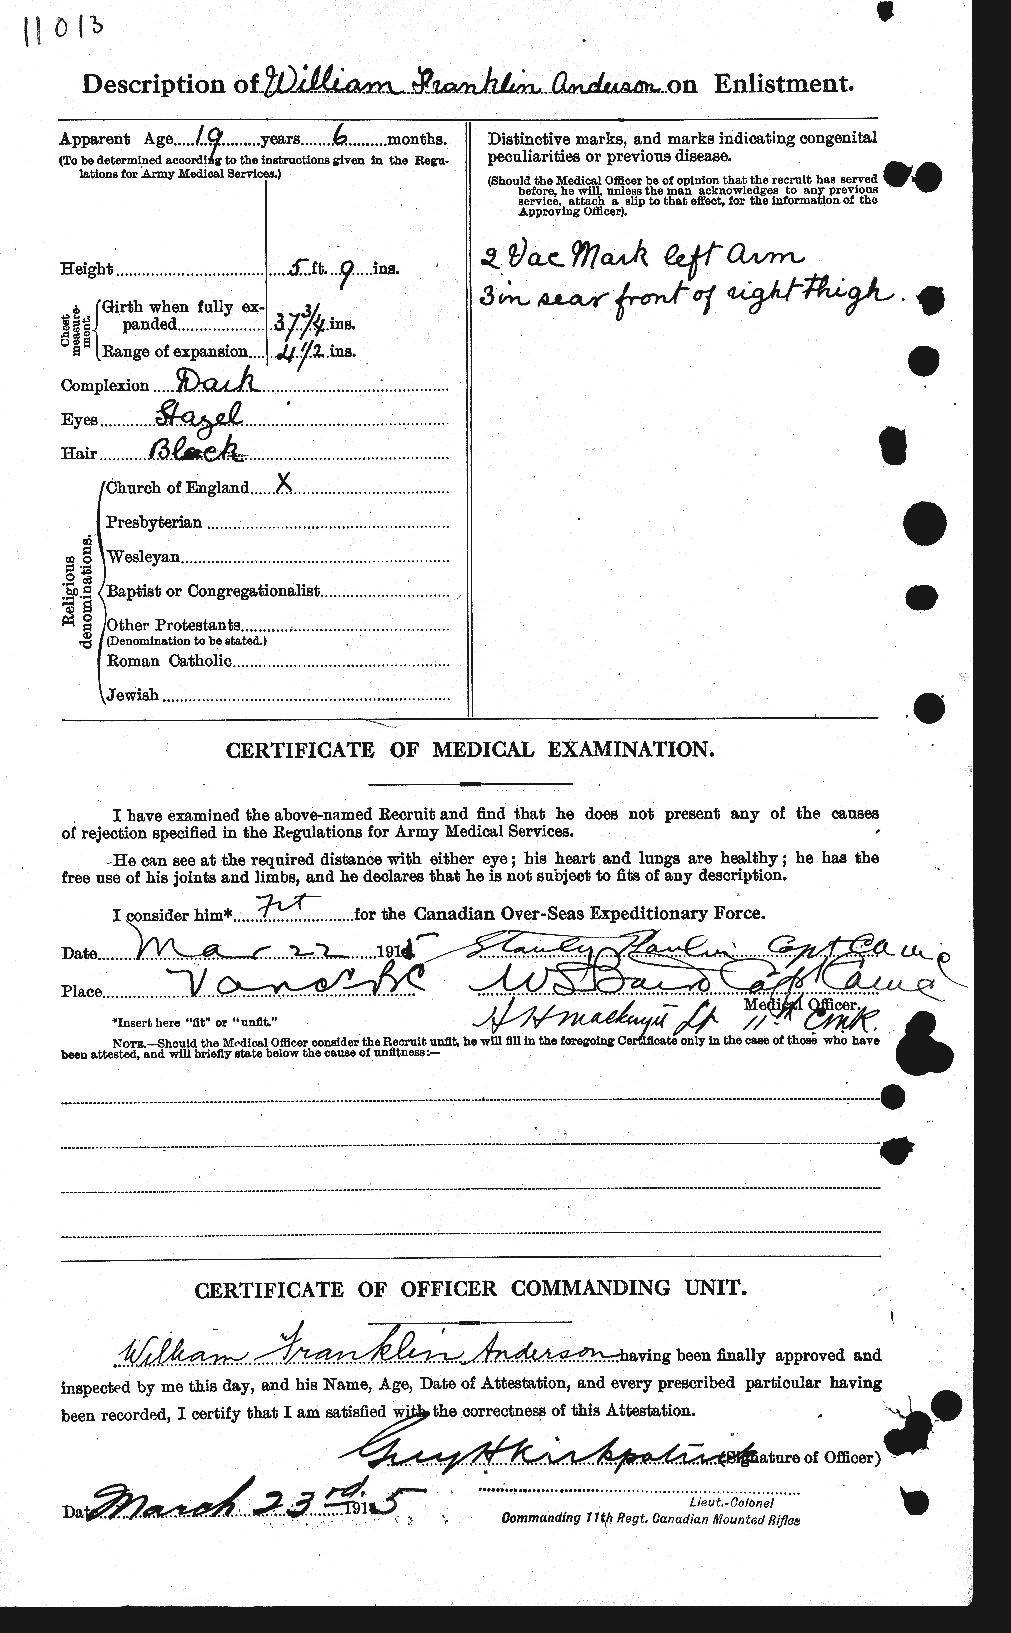 Personnel Records of the First World War - CEF 210793b